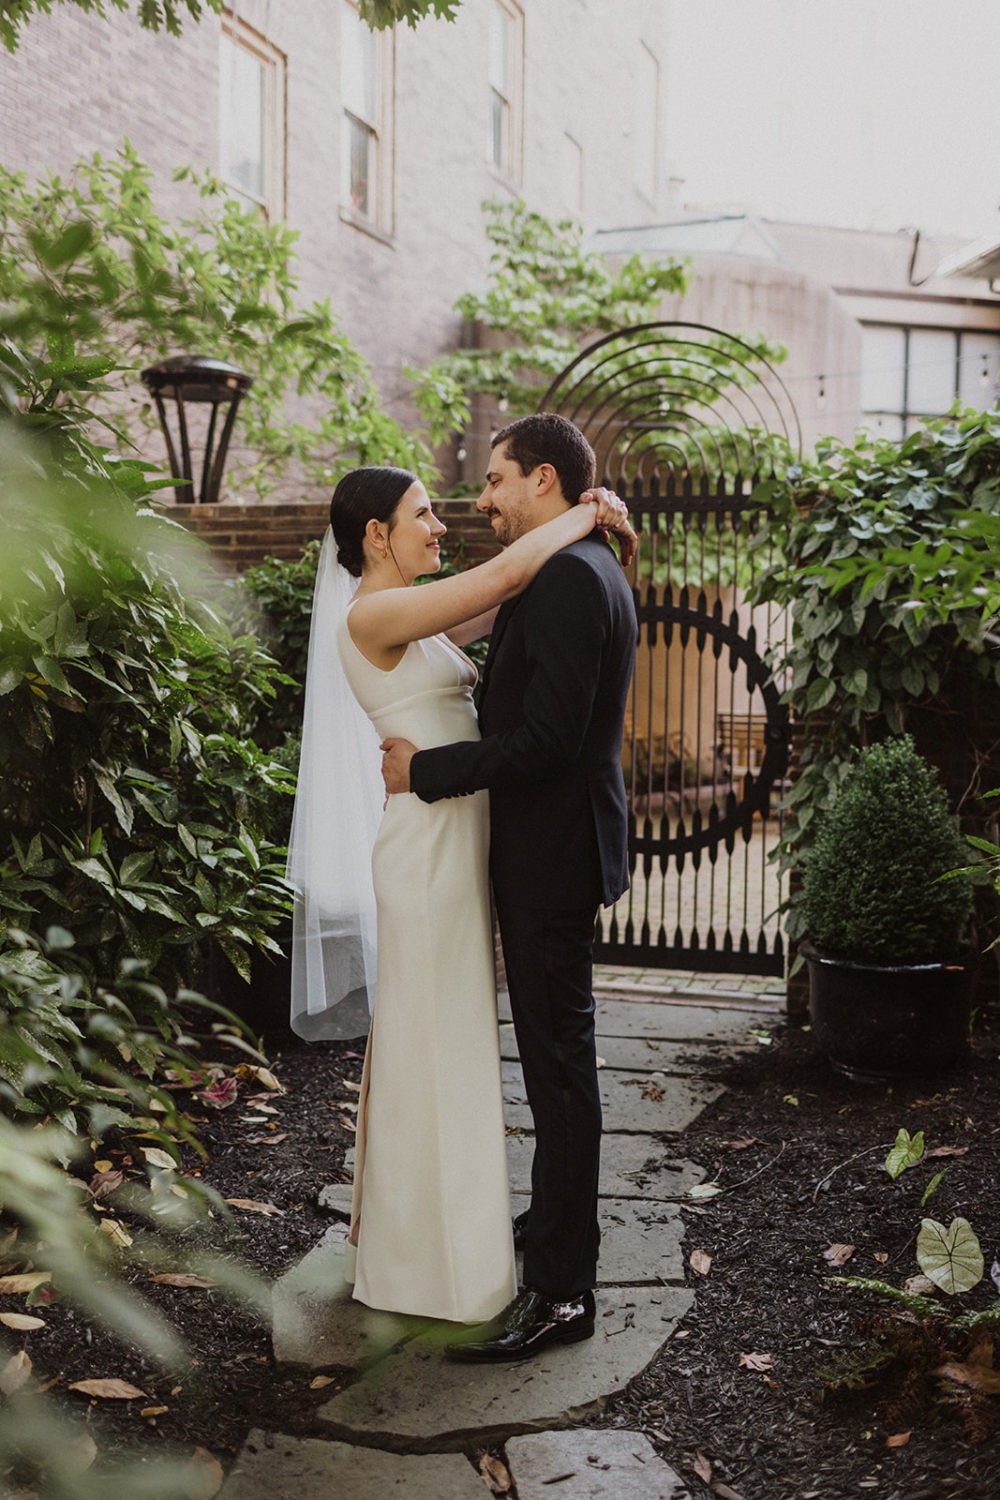 Couple embraces in garden in Dupont Circle